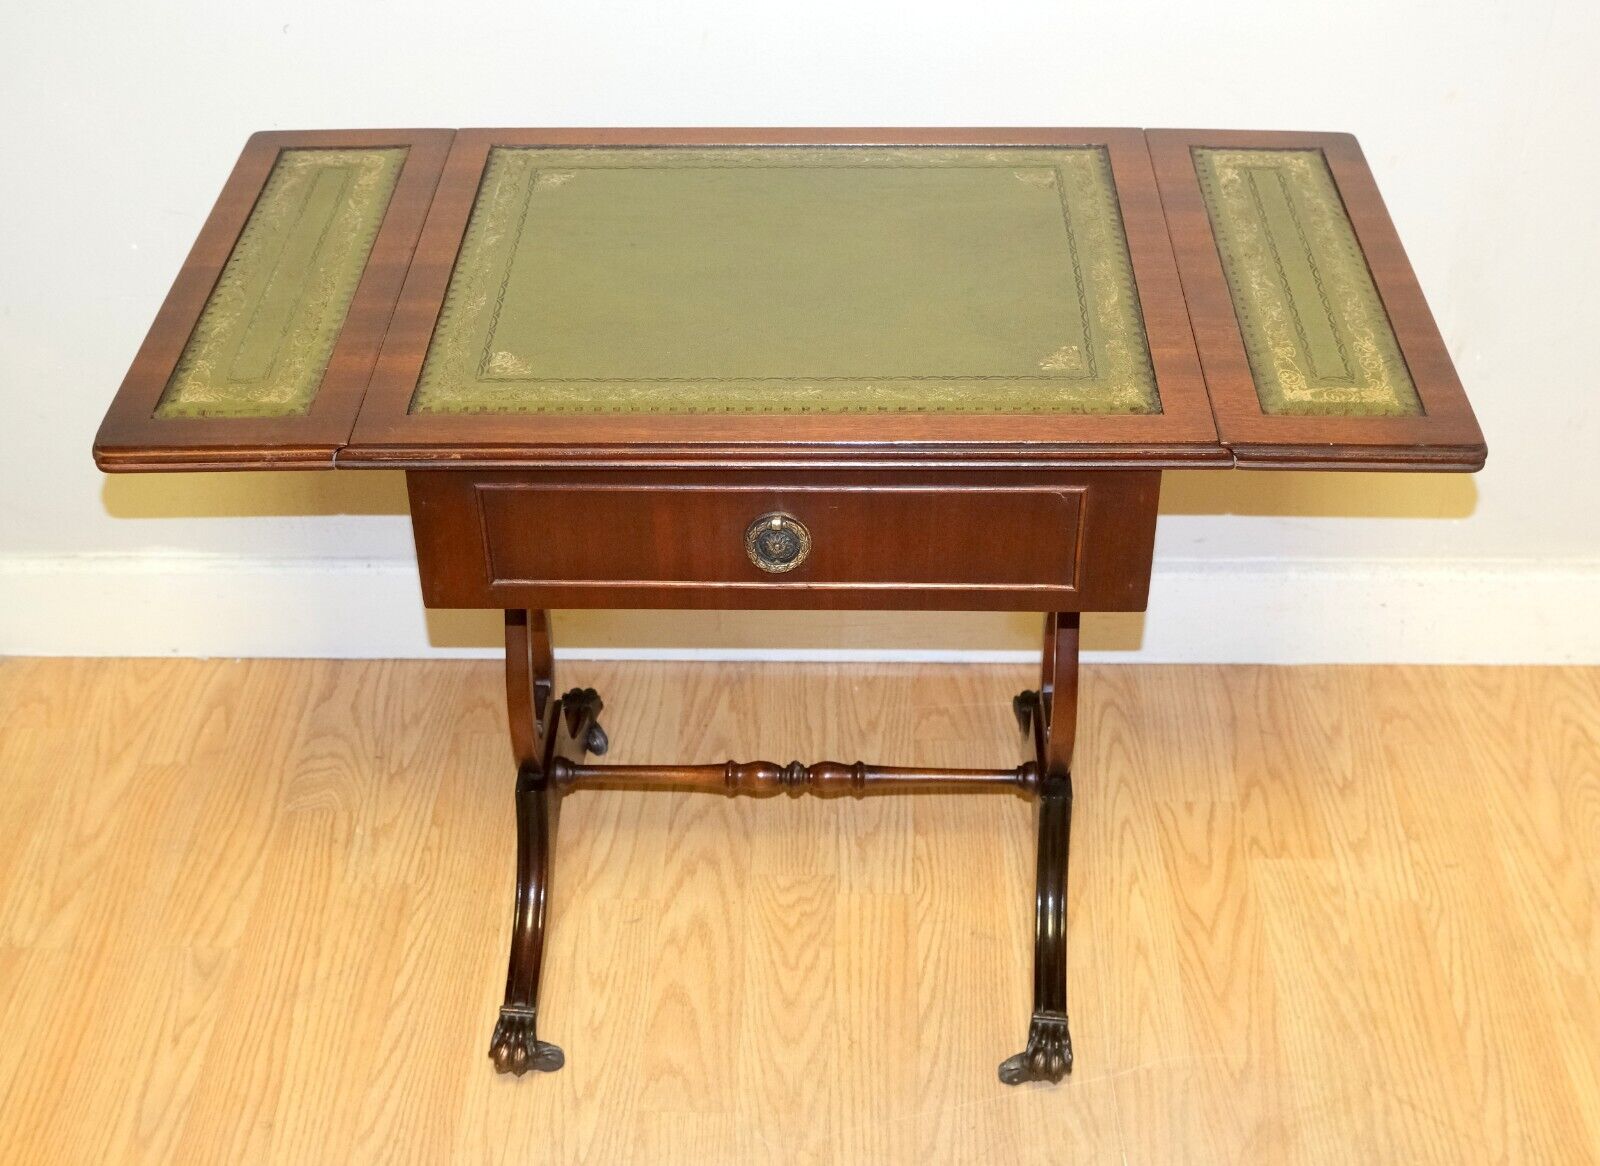 We are delighted to offer for sale this lovely Bevan Funnell brown mahogany extendable green leather top side end lamp card table.

A well made, rich Mahogany colour and good looking side table from the well known British furniture maker, Bevan